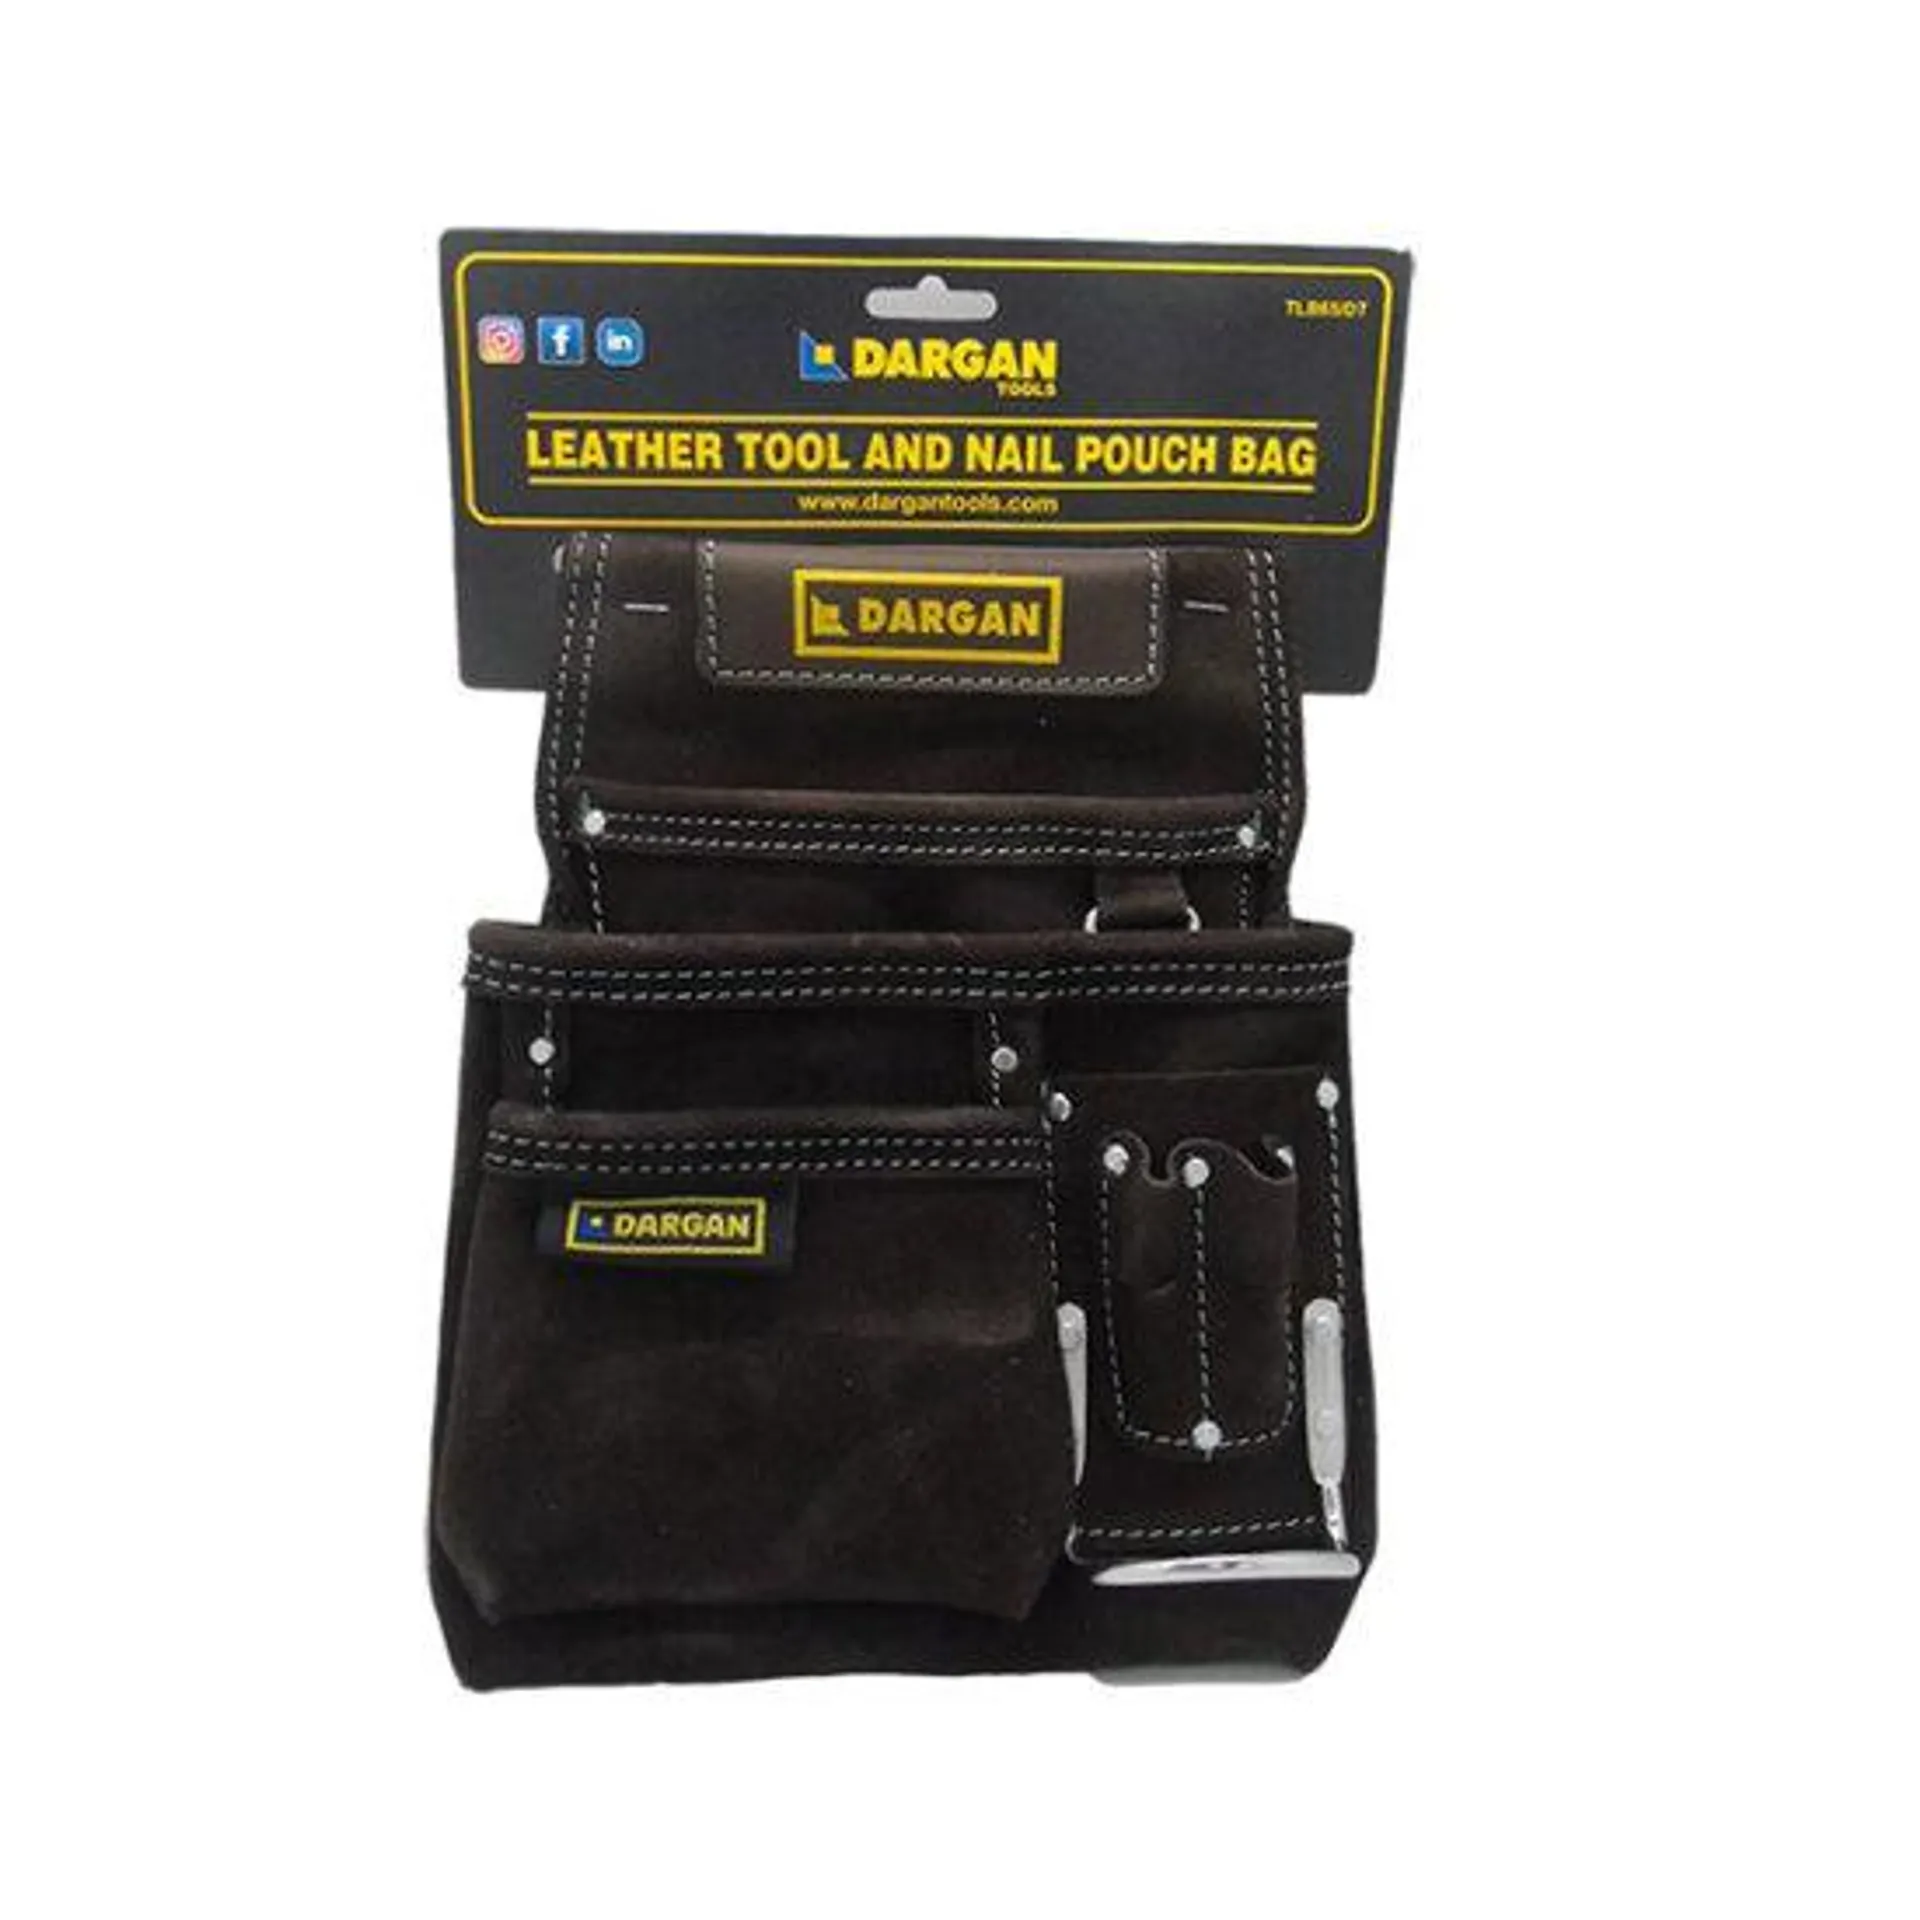 Dargan Professional Leather Tool and Nail Pouch